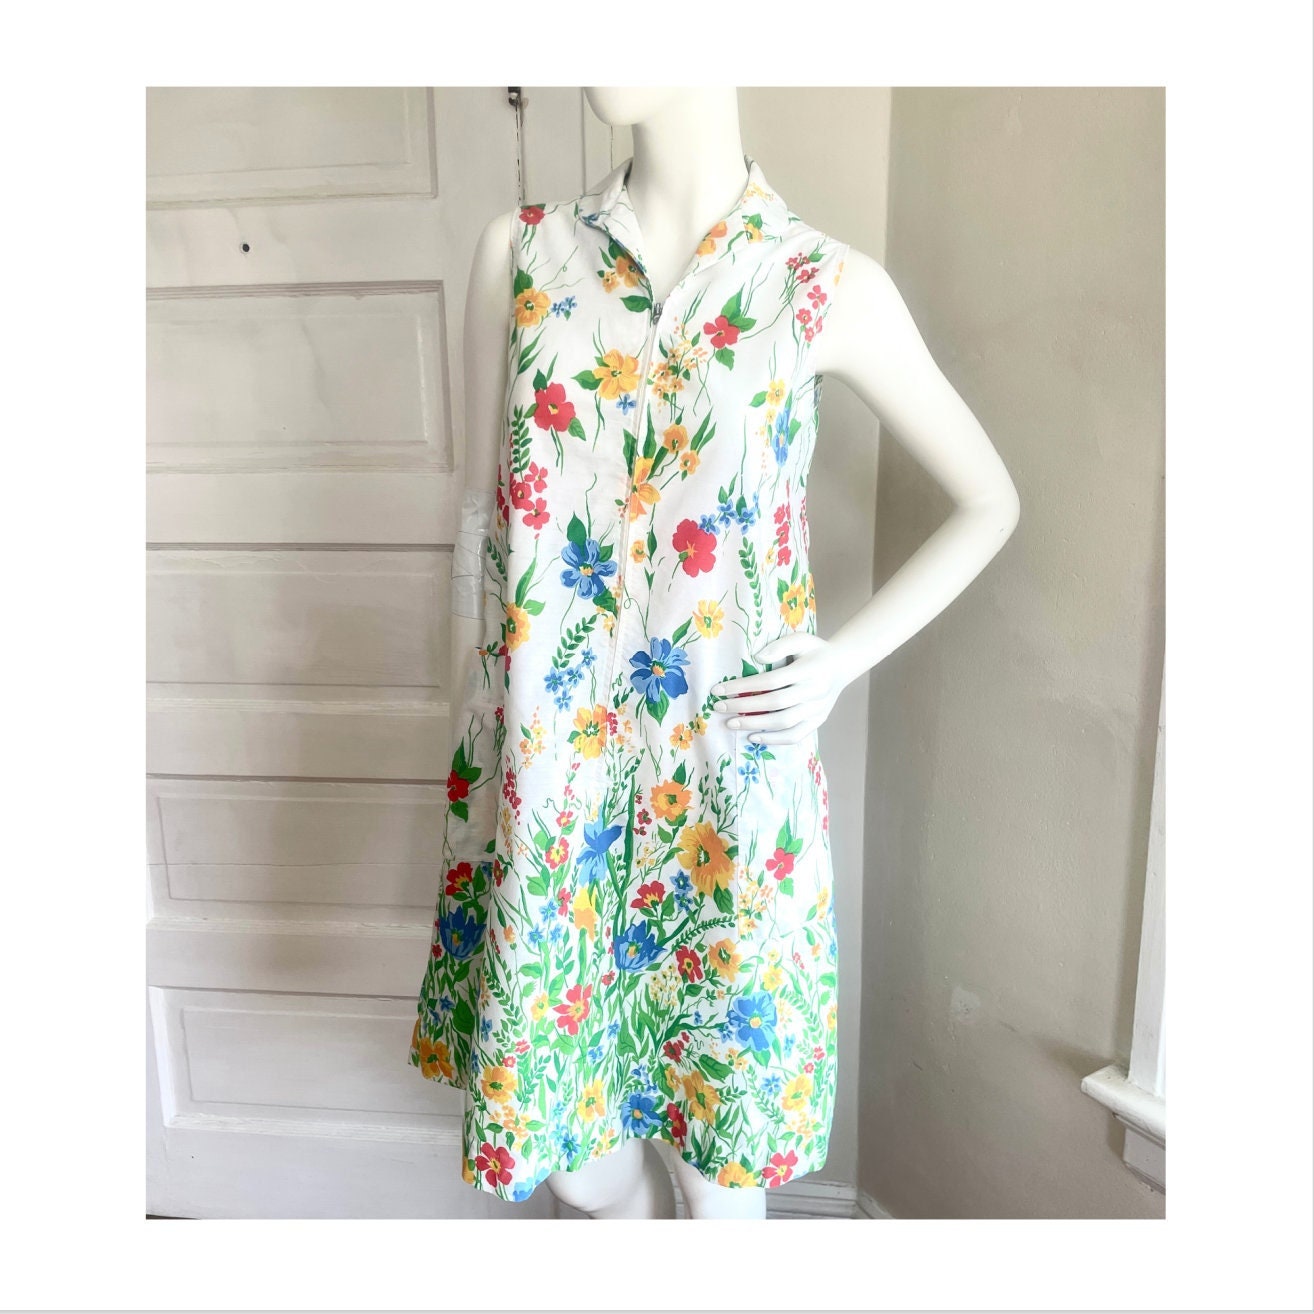 80s Vintage Dresses | Casual to Party Dresses